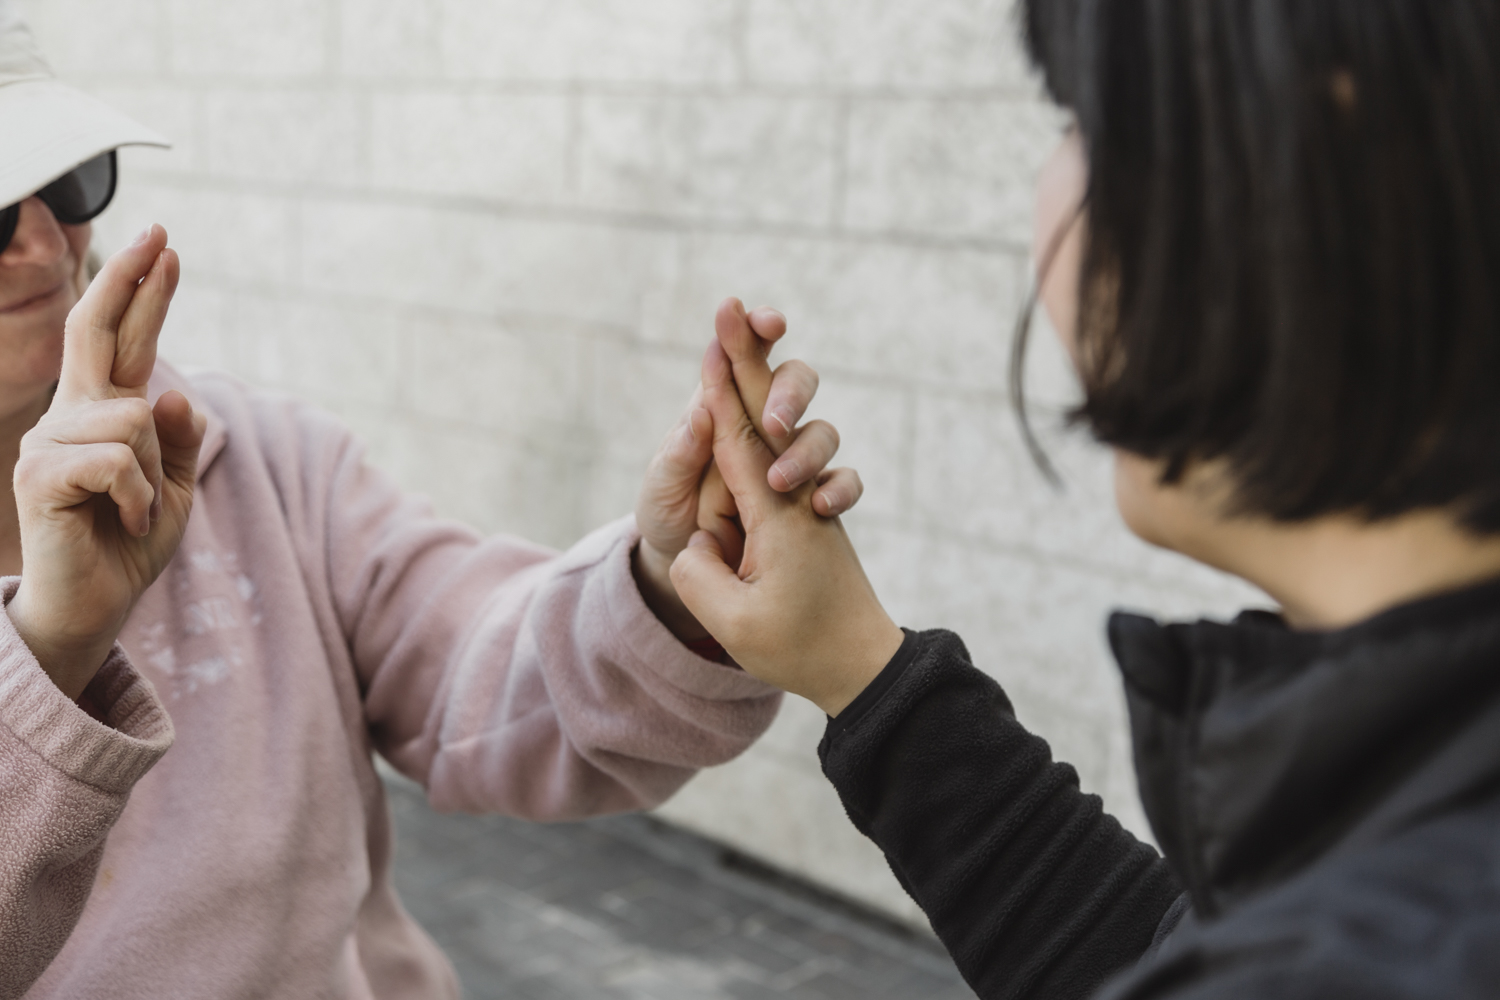 An intervenor demonstrates how tactile ASL works with a client. The signer communicates using ASL, and the person receiving uses their hands to feel the signs as they are made.